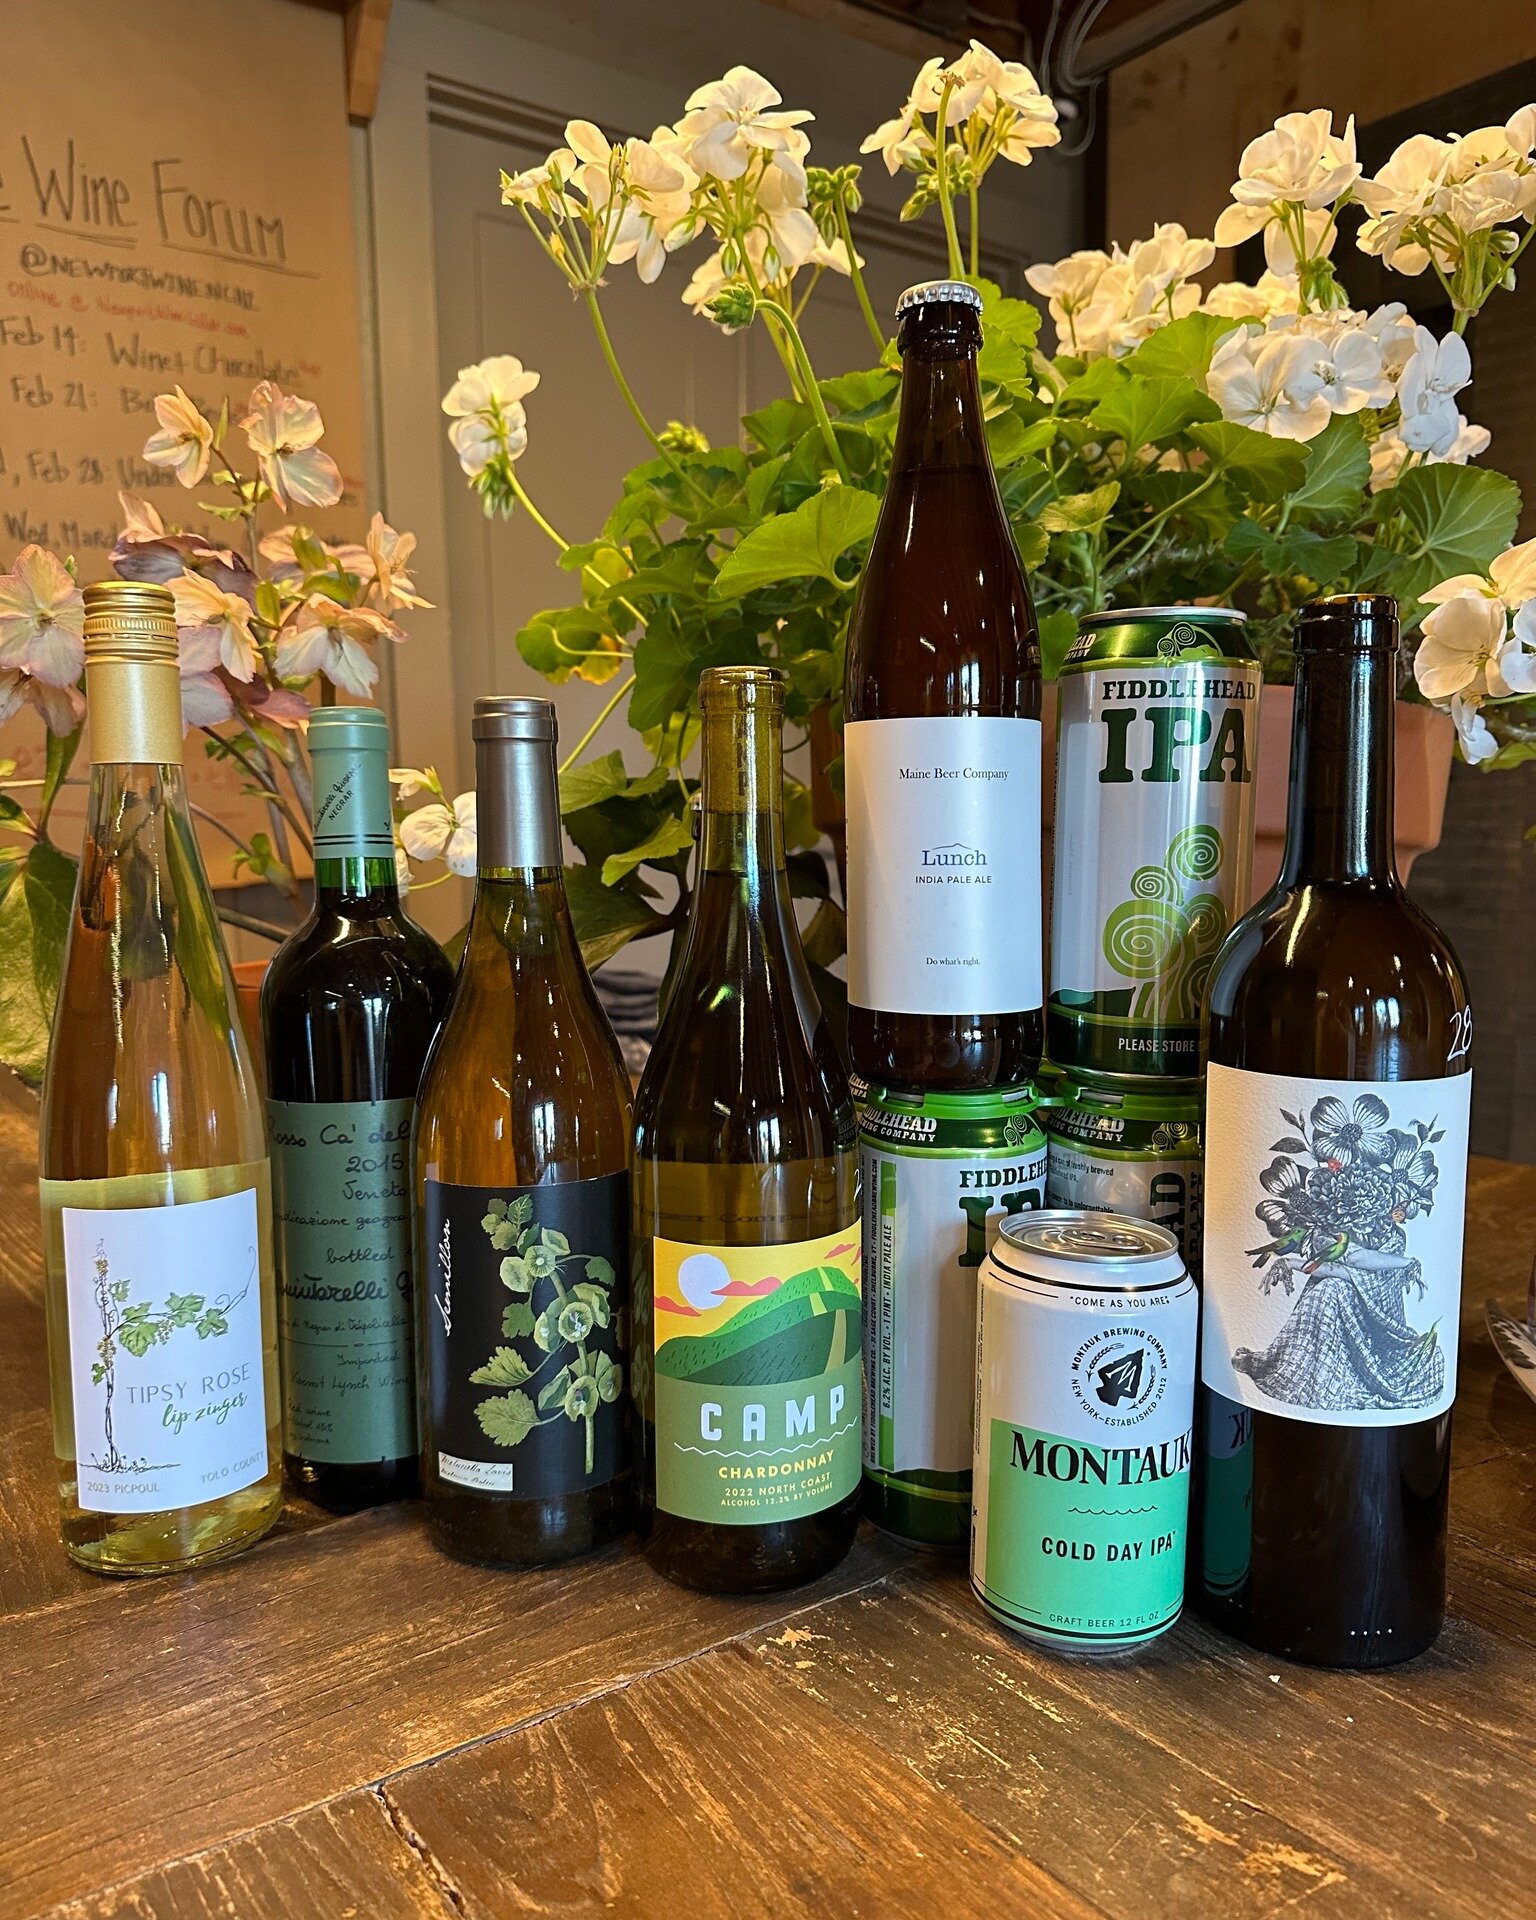 KEEP IT GREEN!! 🍀

Happy St. Paddy's Day Weekend!! 🇮🇪 

In honor of the celebration of we will taste some beer &amp; wines with green labels this weekend.  Join me 4-6 Fri &amp; Sat for our weekend tasting.  A sip &amp; a chance to learn in the co